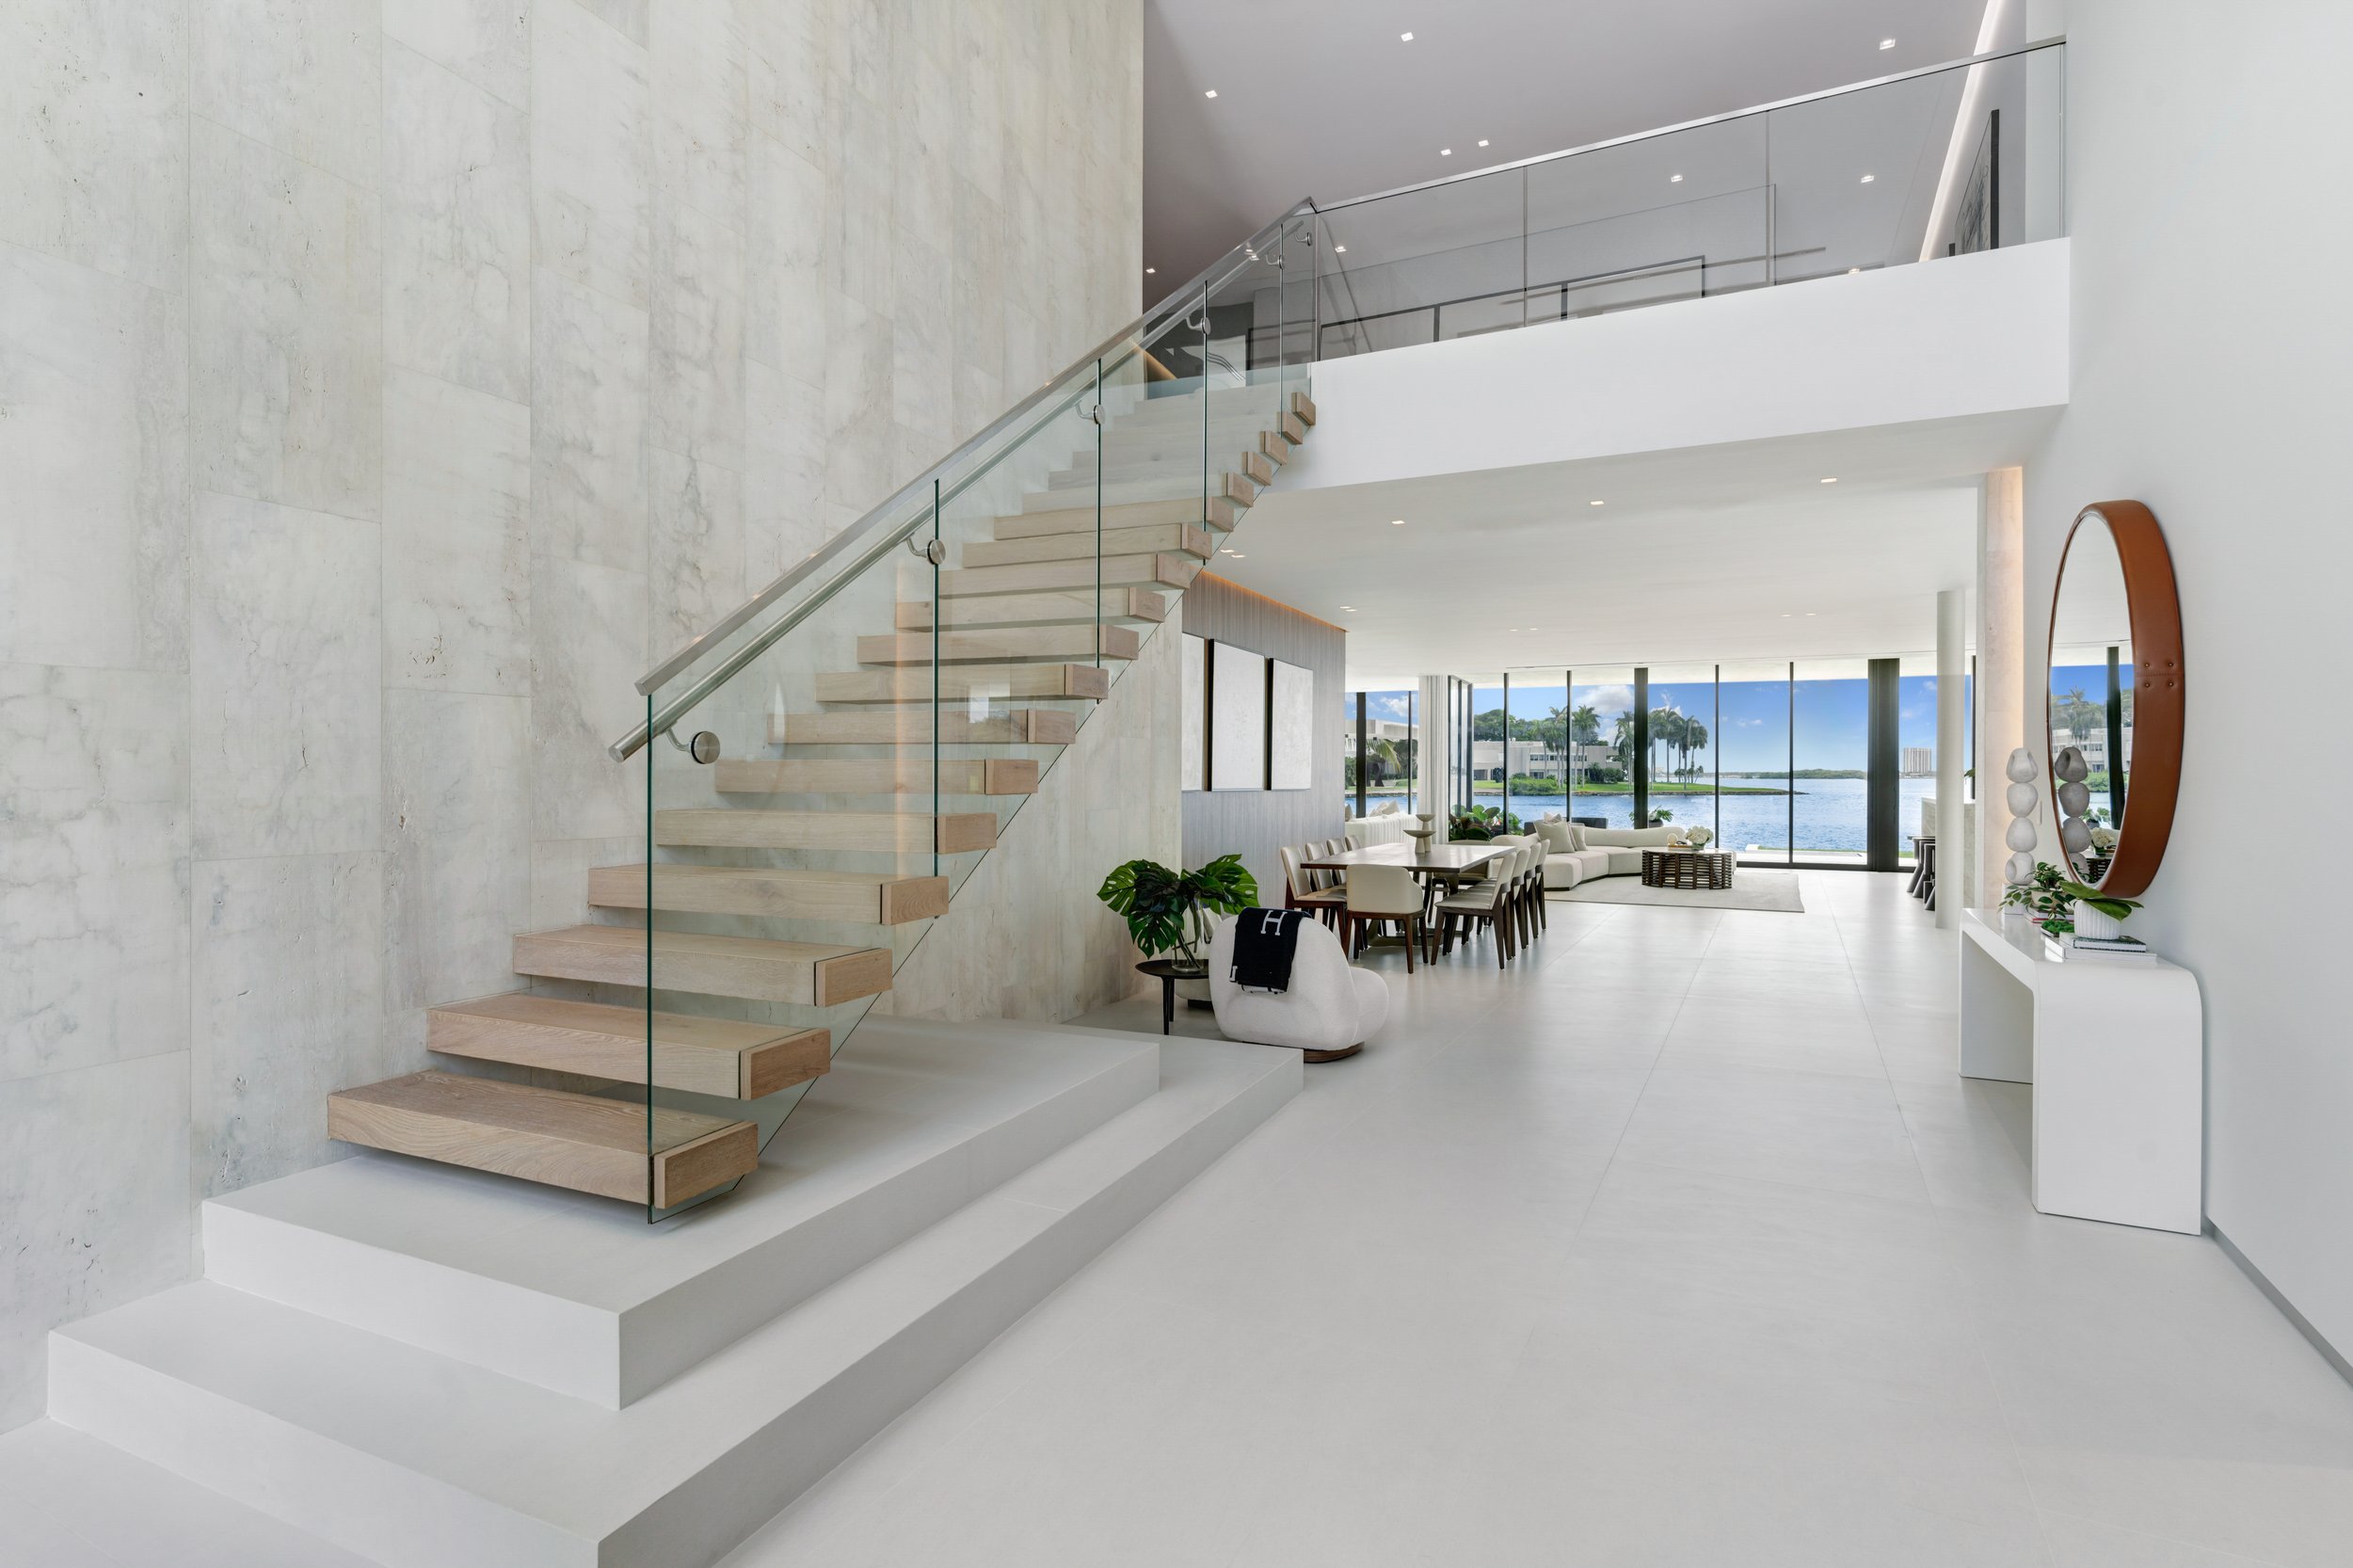 Check Out The Tropical Modern Waterfront On Bay Harbor Islands Asking $22.95 Million 2.jpg